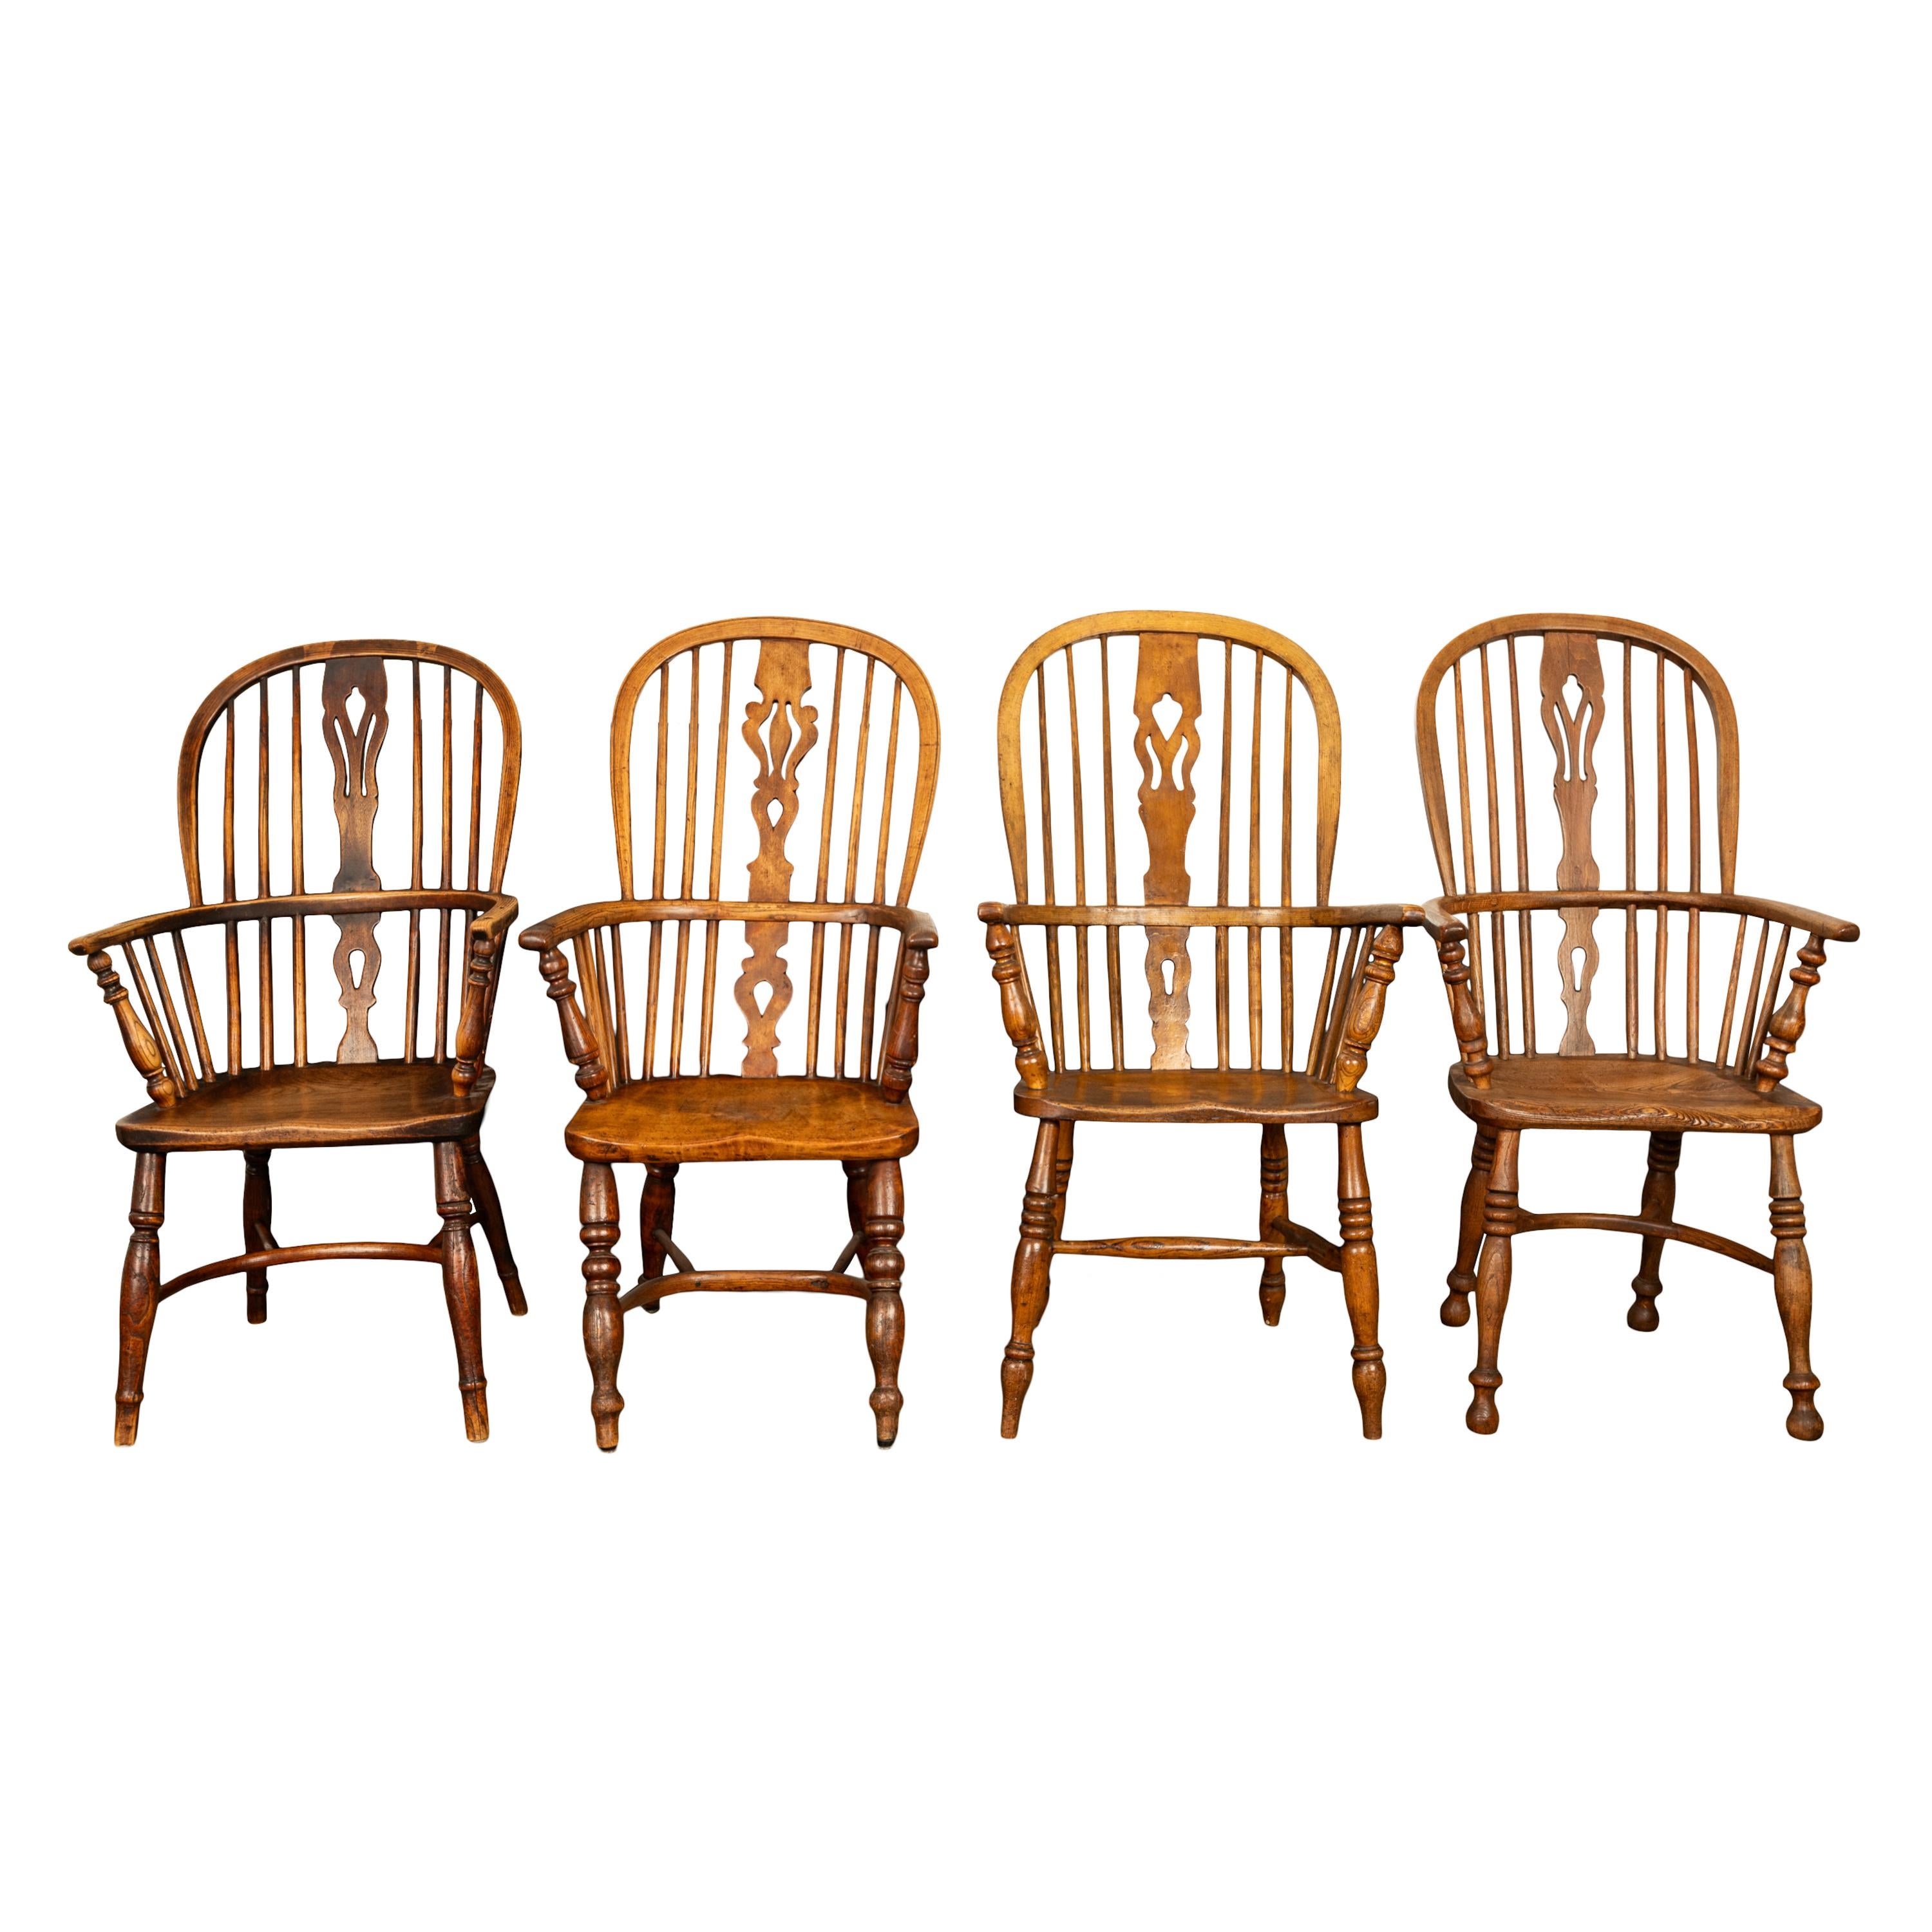 A very nice set of 4 antique English country high-backed ash & elm Windsor armchairs, circa 1840.
This harlequin set of four Windsor chairs are from the Buckinghamshire area, the hoop back, spindles a legs and stretchers are made from ash and the